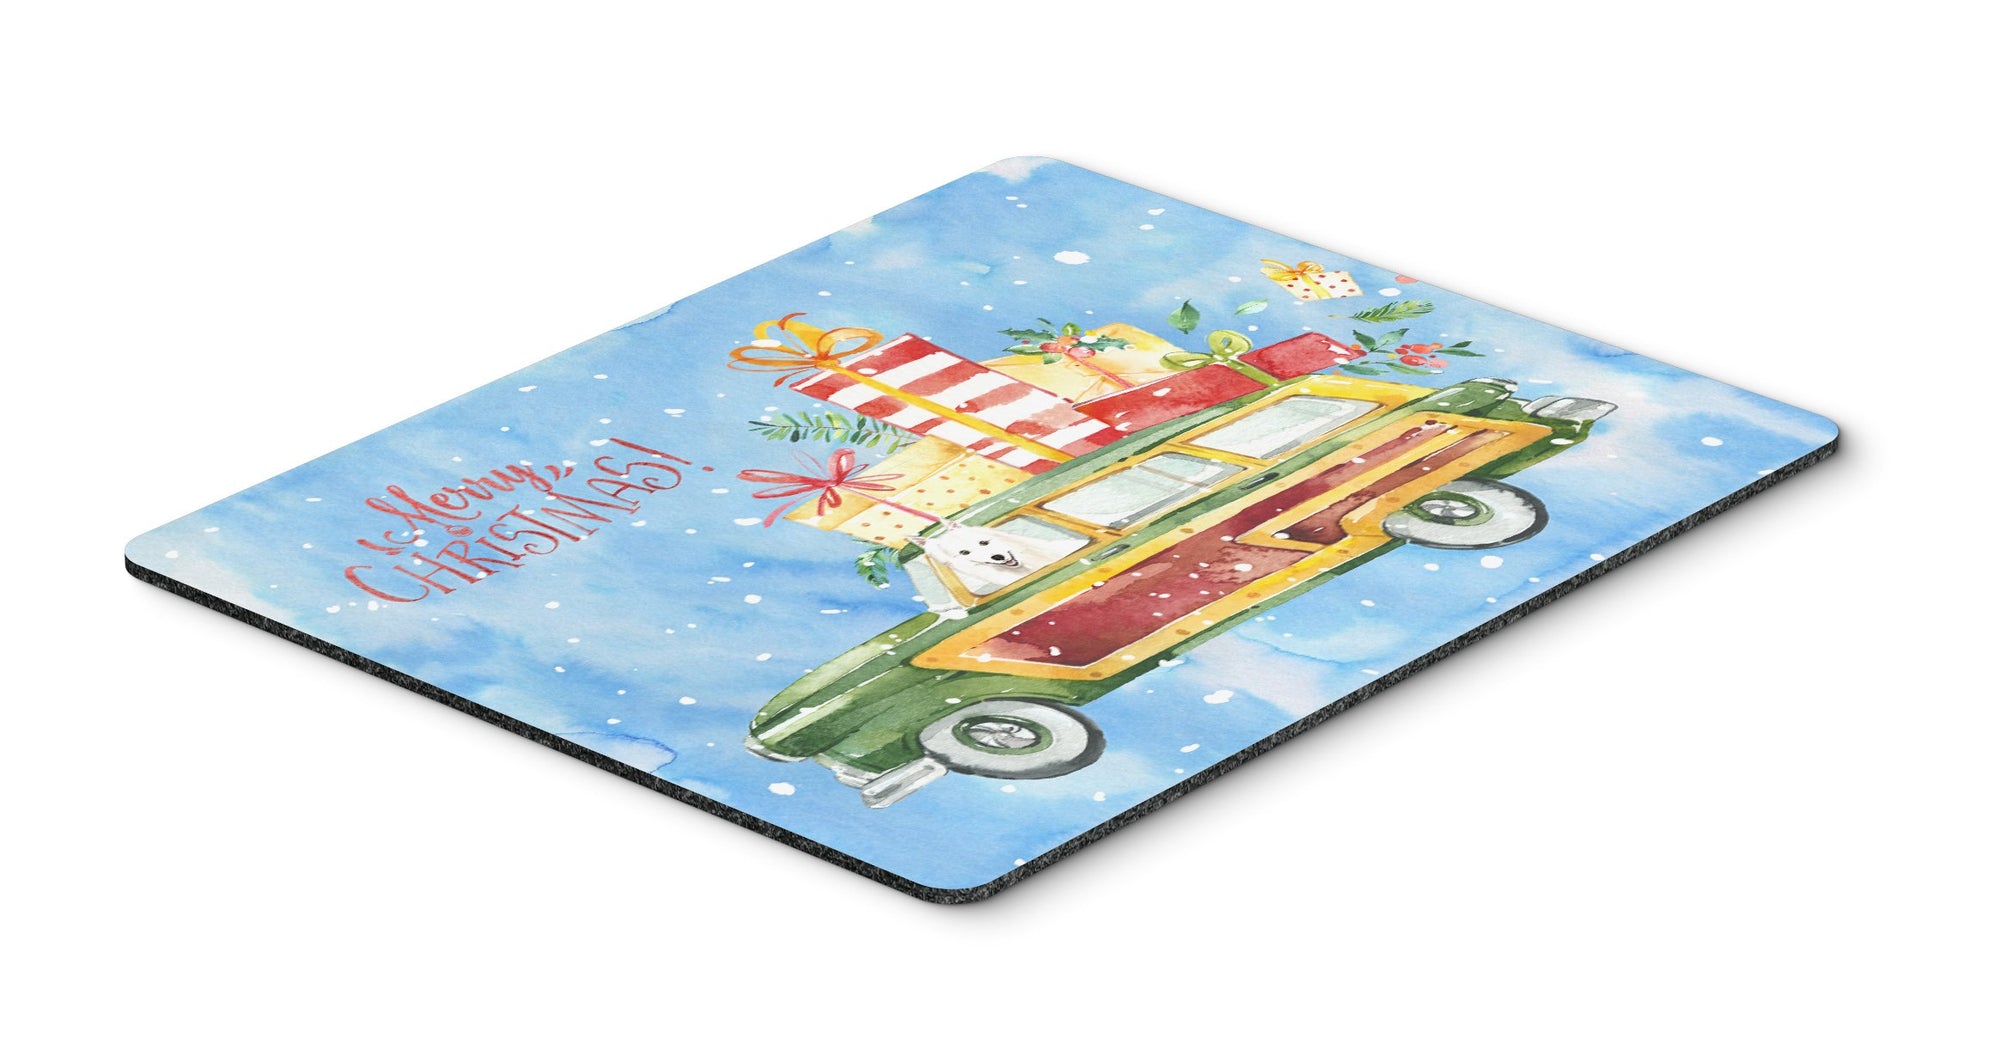 Merry Christmas Japanese Spitz Mouse Pad, Hot Pad or Trivet CK2410MP by Caroline's Treasures